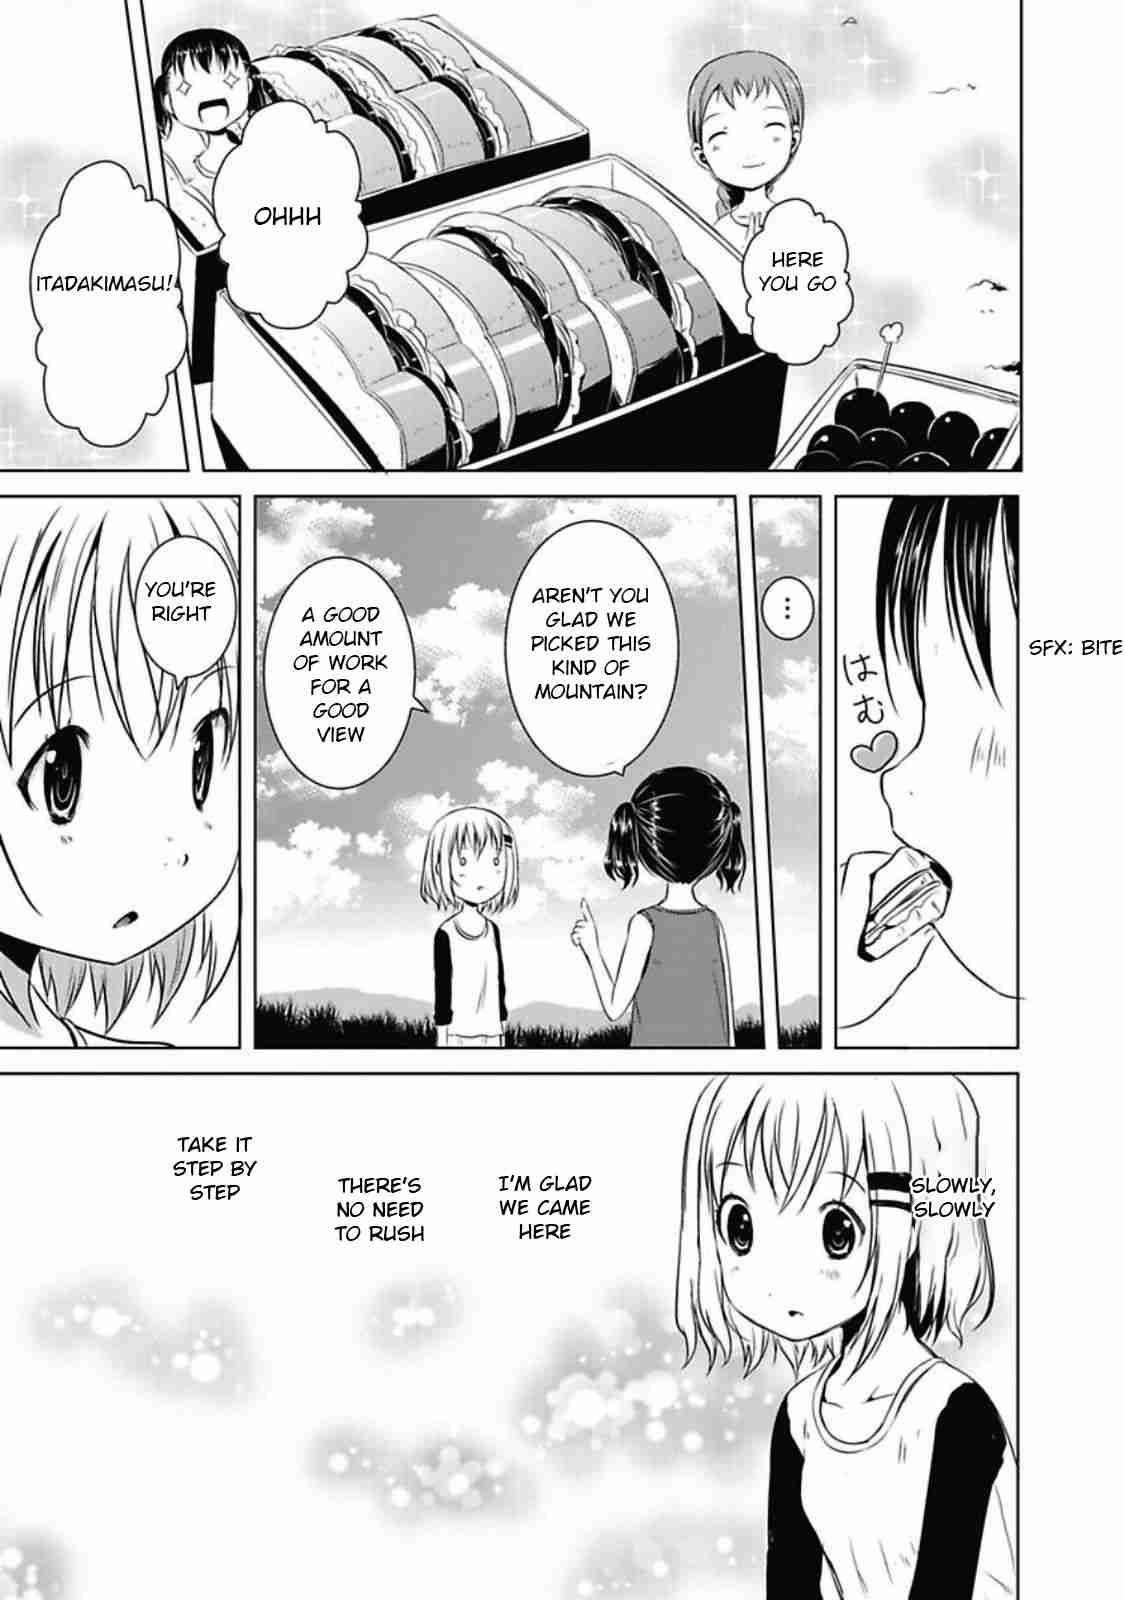 Yama No Susume Vol. 4 Ch. 25 Where Is The Mountain Of Our Memories?